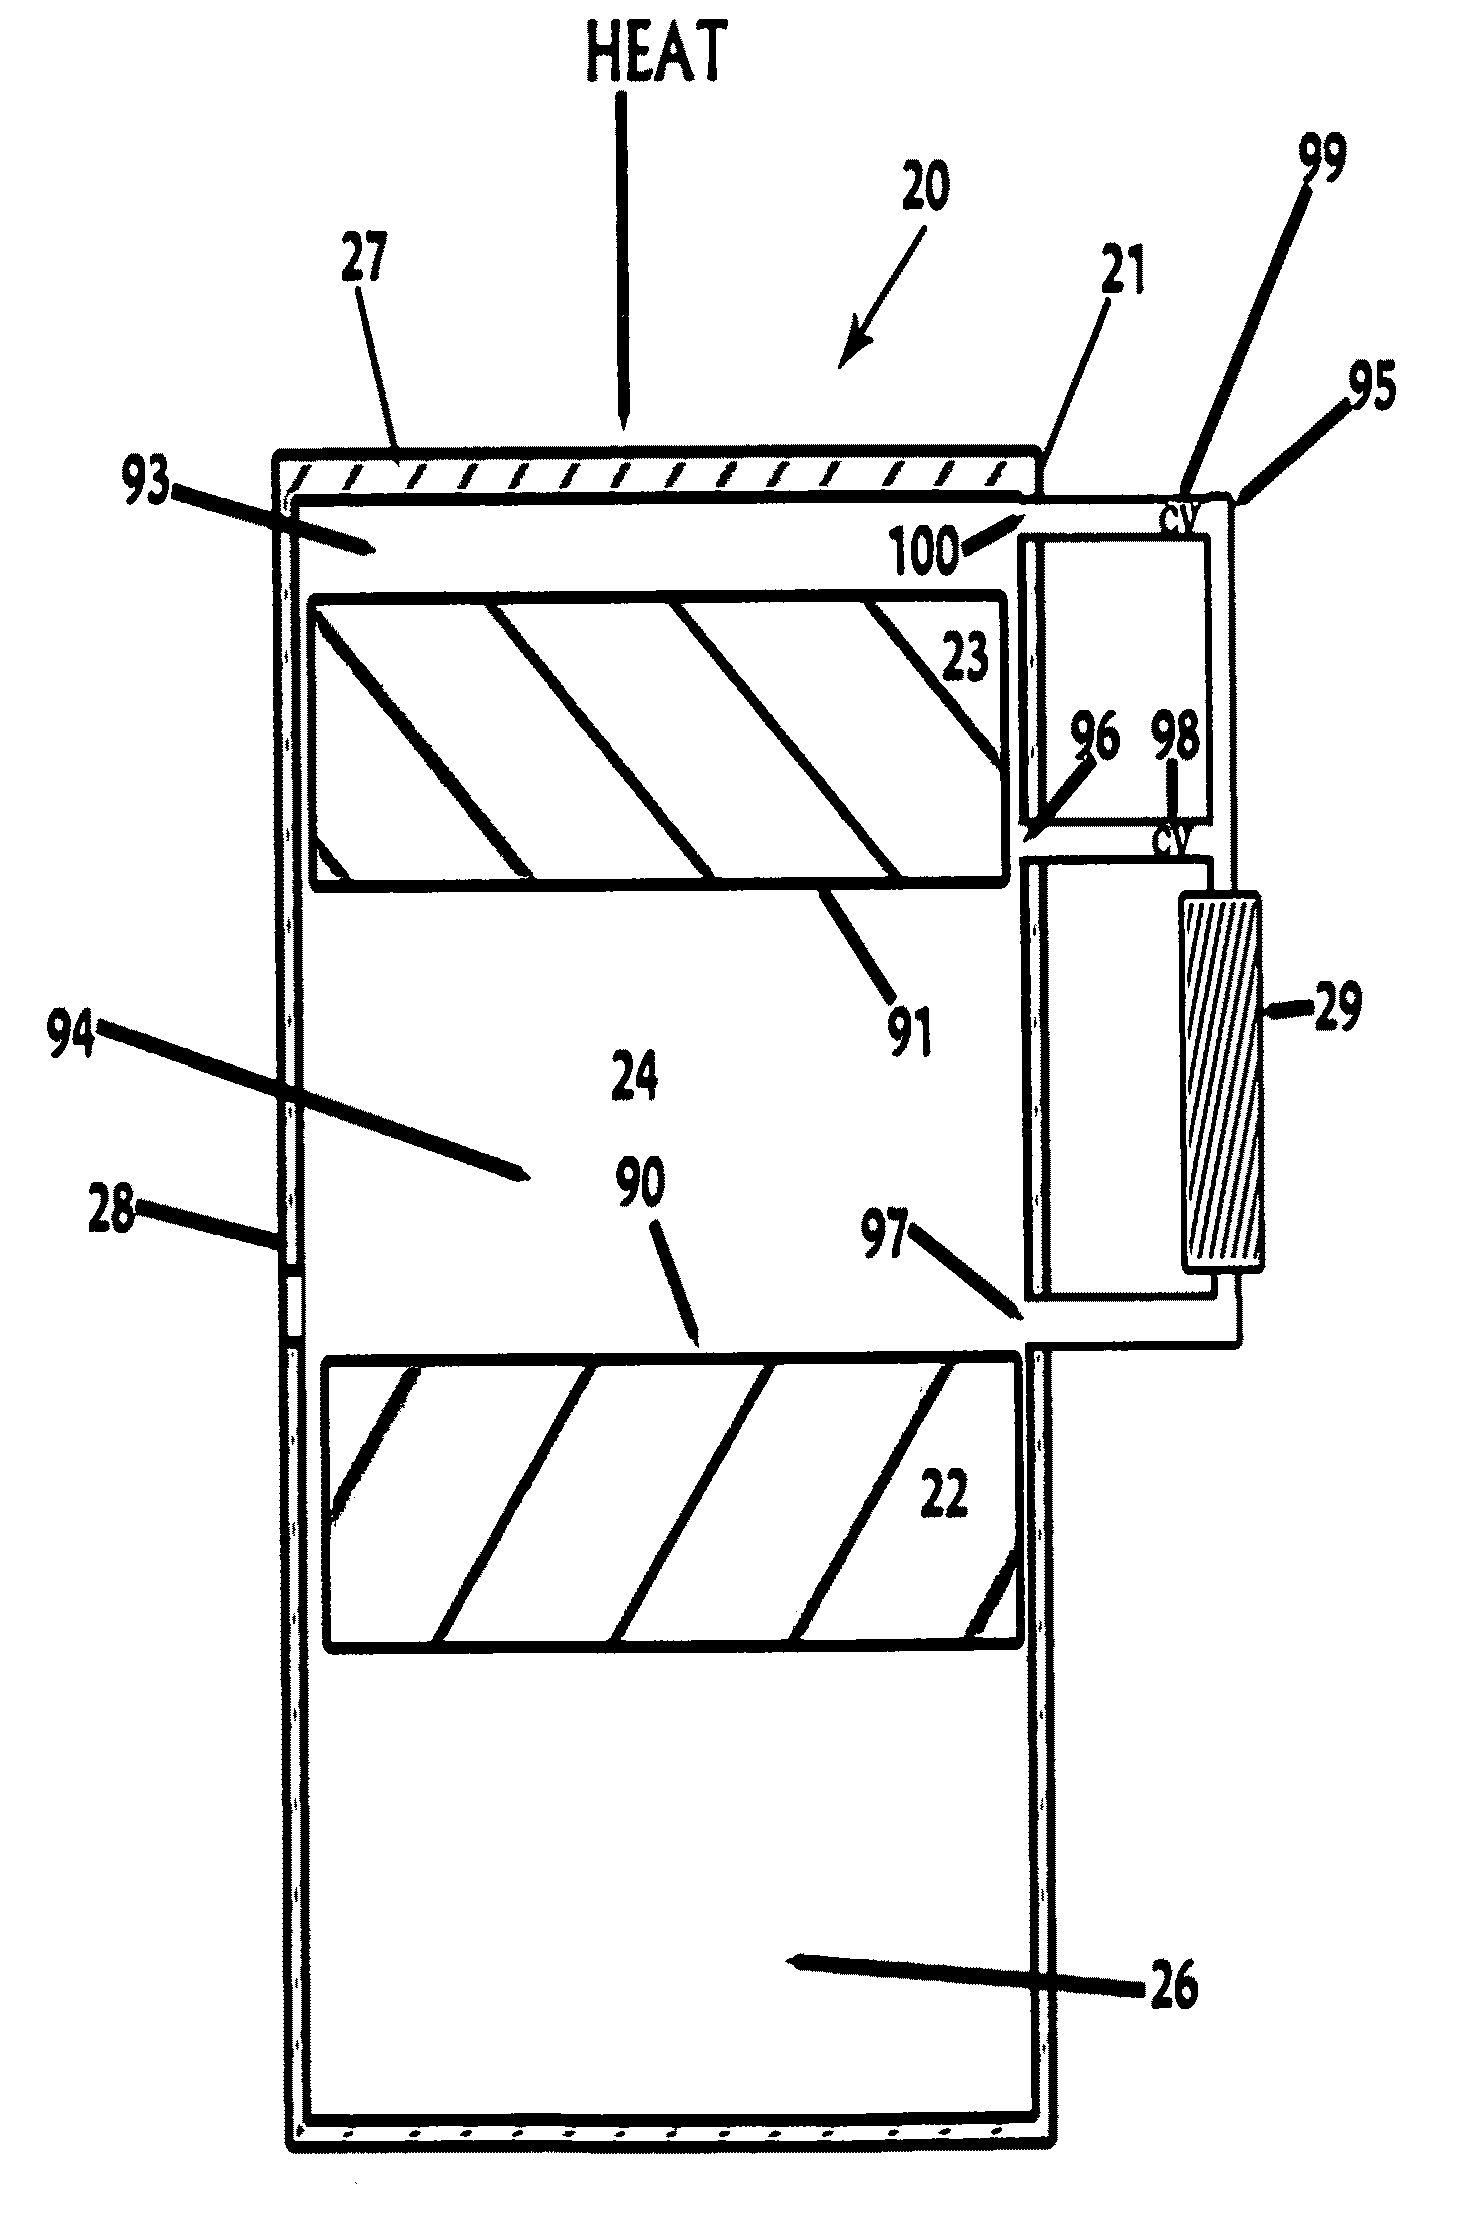 Method for increasing performance of a stirling or free-piston engine